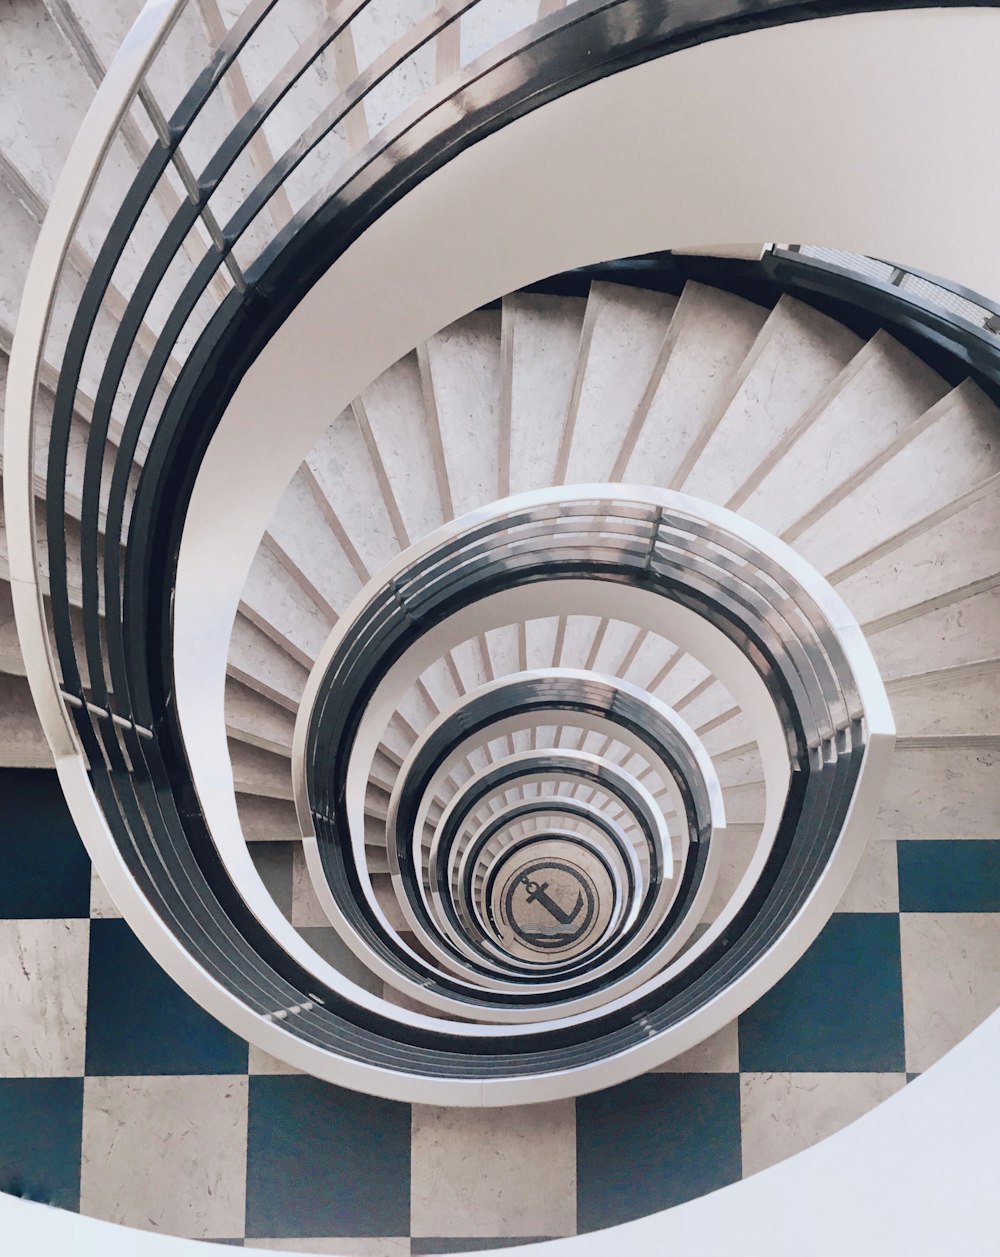 white and gray spiral stairs with no people